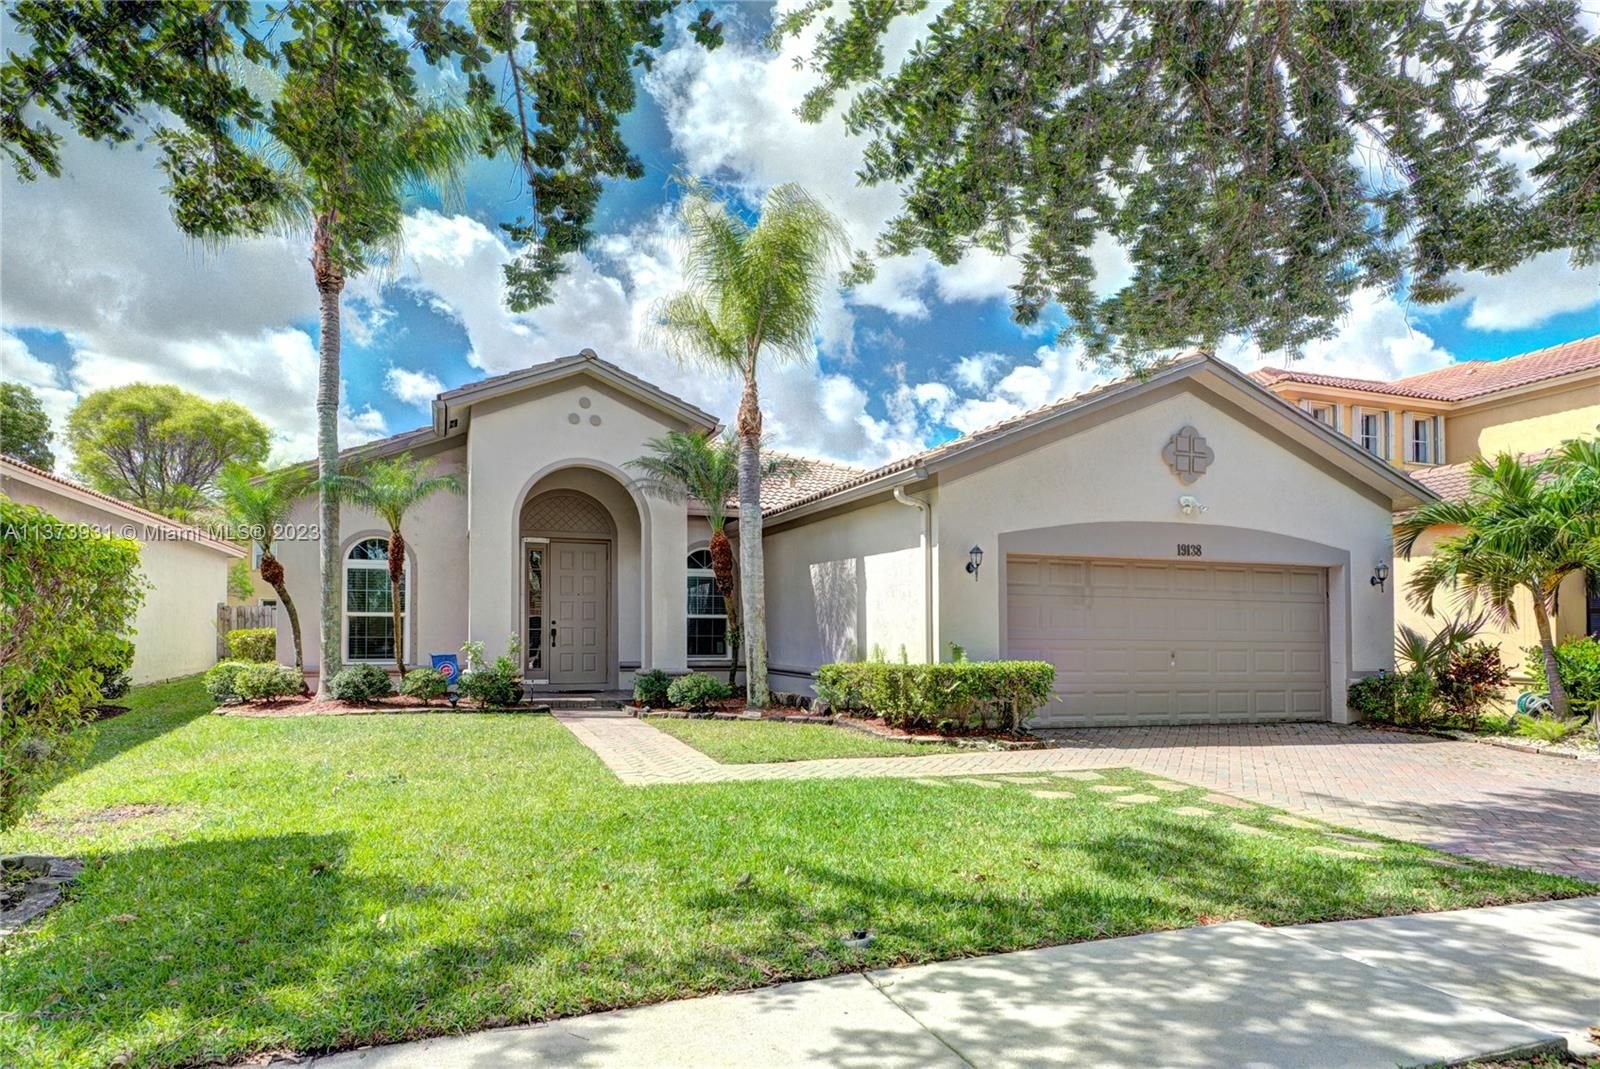 Real estate property located at 19138 Stonebrook St, Broward County, Weston, FL